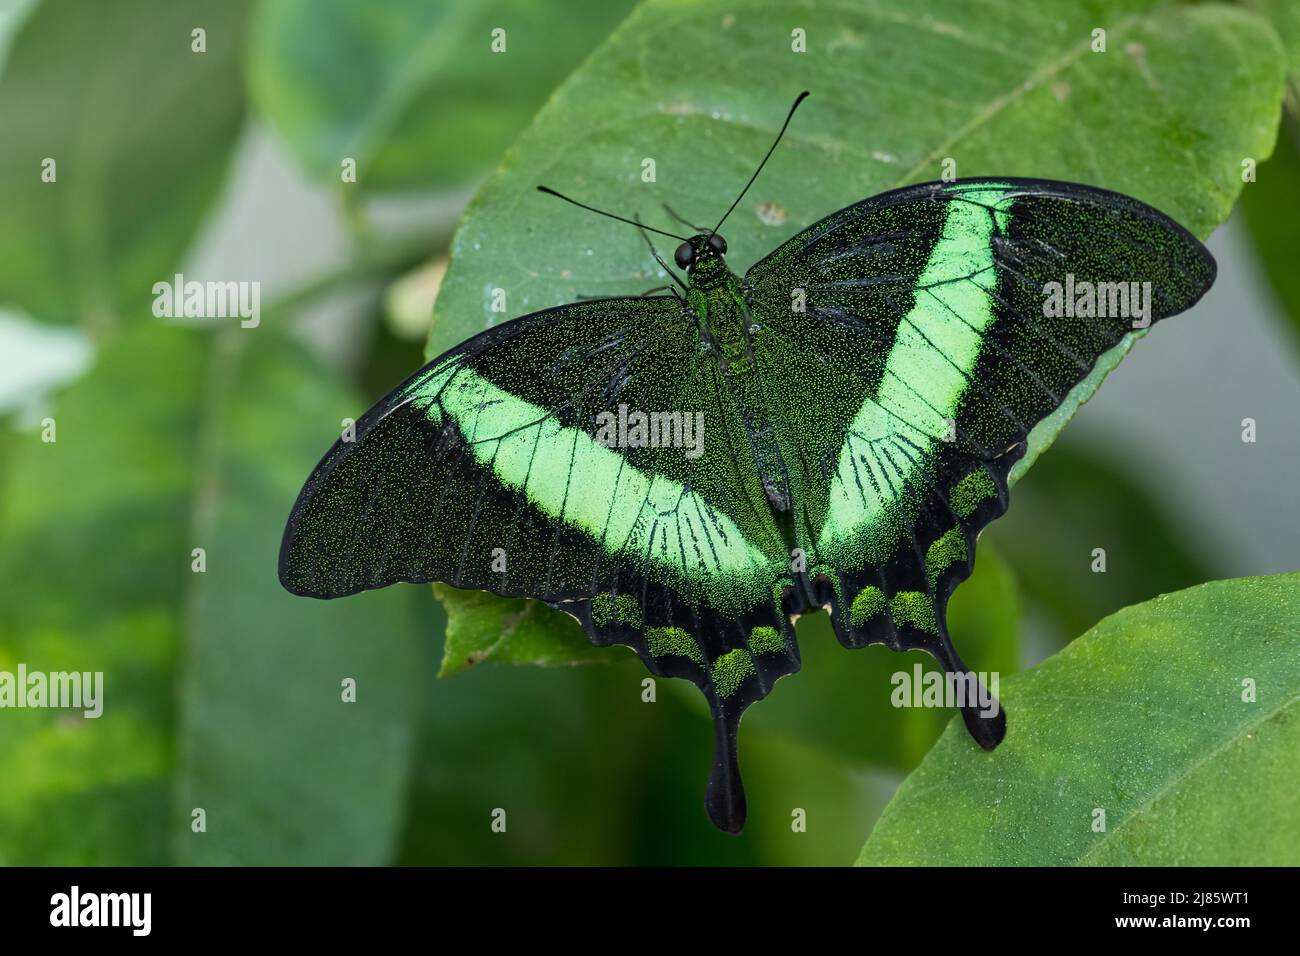 Emerald Swallowtail - Papilio palinurus, beautiful green and black butterfly from Malaysia forests. Stock Photo